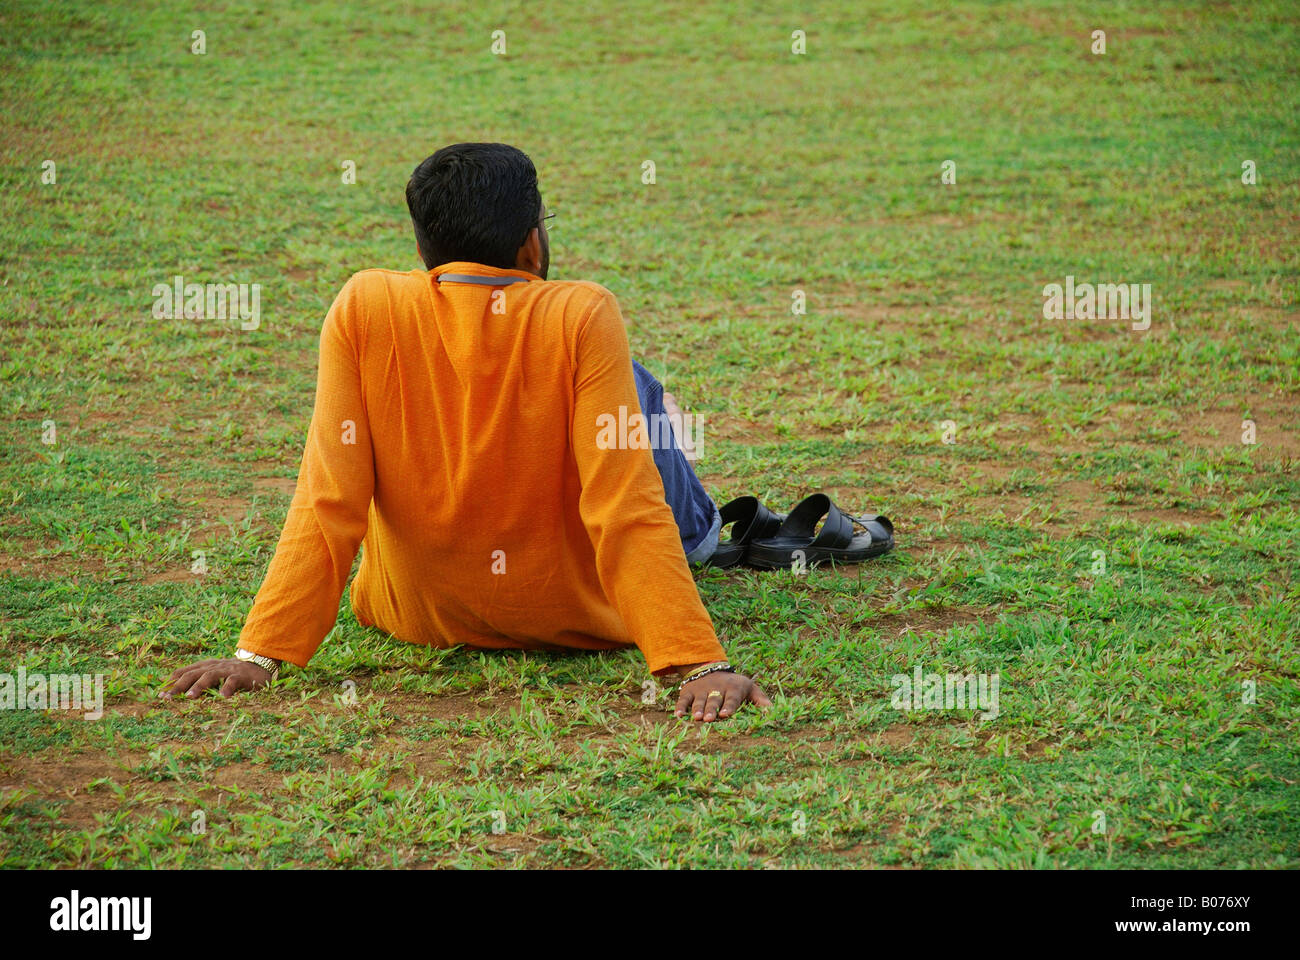 Young man in yellow shirt siting and relaxing on the grass Stock Photo